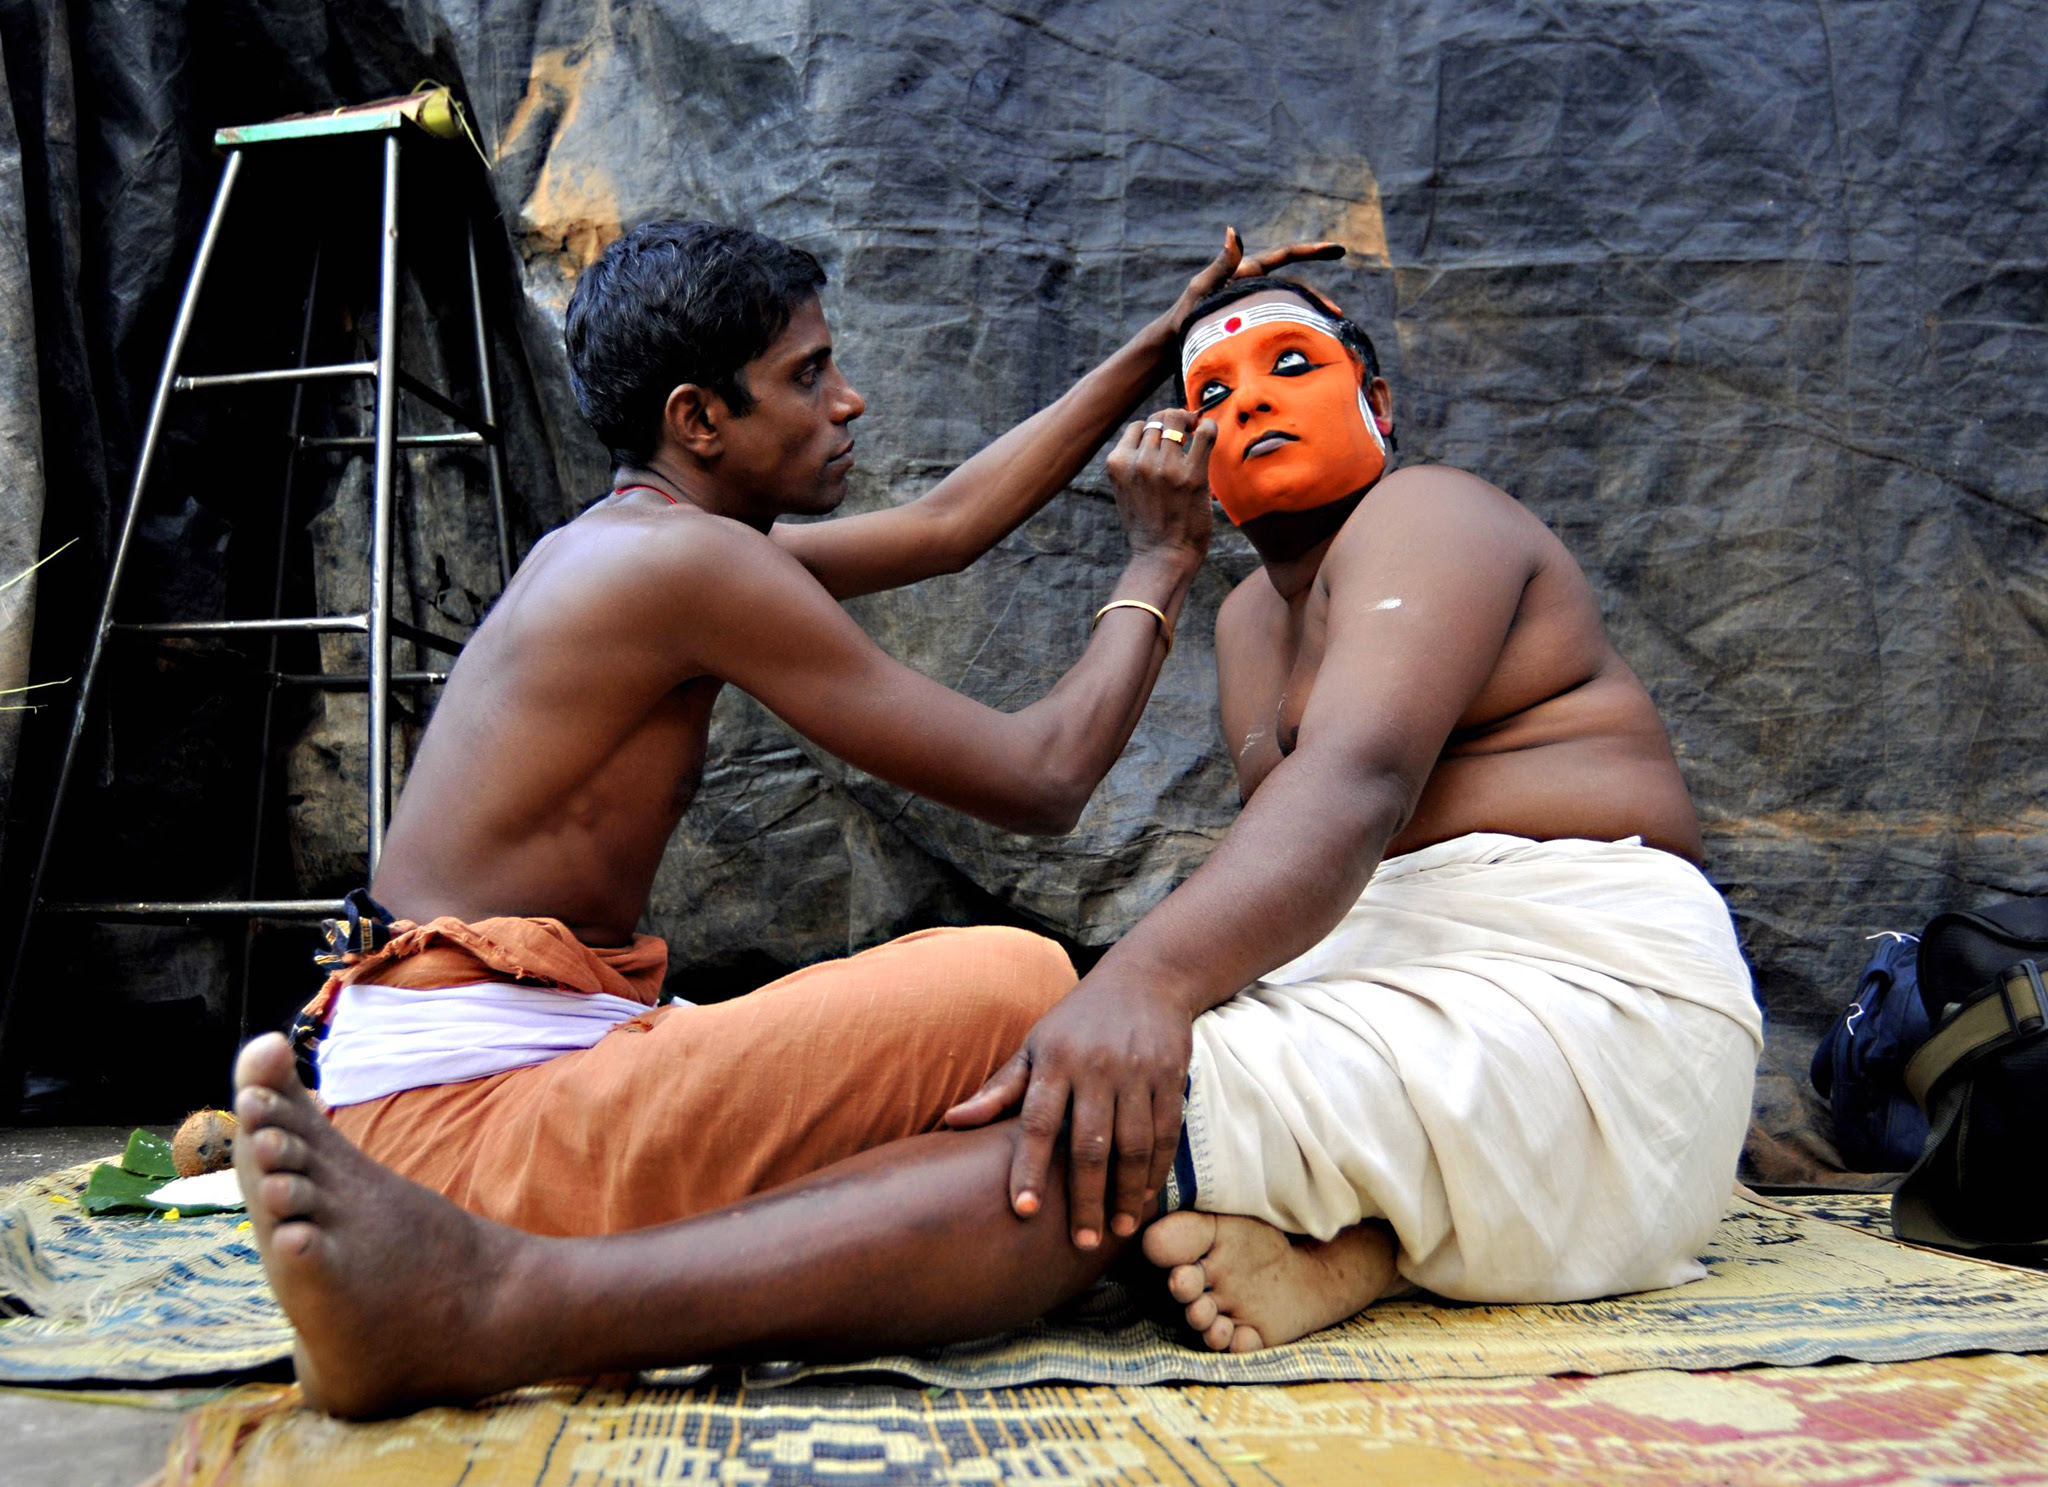 Artist has his face painted to resemble Hindu god Shasthappan before performing during the Theyyam ritual in Somwarpet...An artist has his face painted to resemble Hindu god Shasthappan before performing during the Theyyam ritual in Somwarpet town in the southern Indian state of Karnataka March 16, 2015. Theyyam is a form of worship and is celebrated mostly in southern parts of the country. Picture taken March 16, 2015. REUTERS/Abhishek N. Chinnappa (INDIA - Tags: ANNIVERSARY RELIGION SOCIETY)